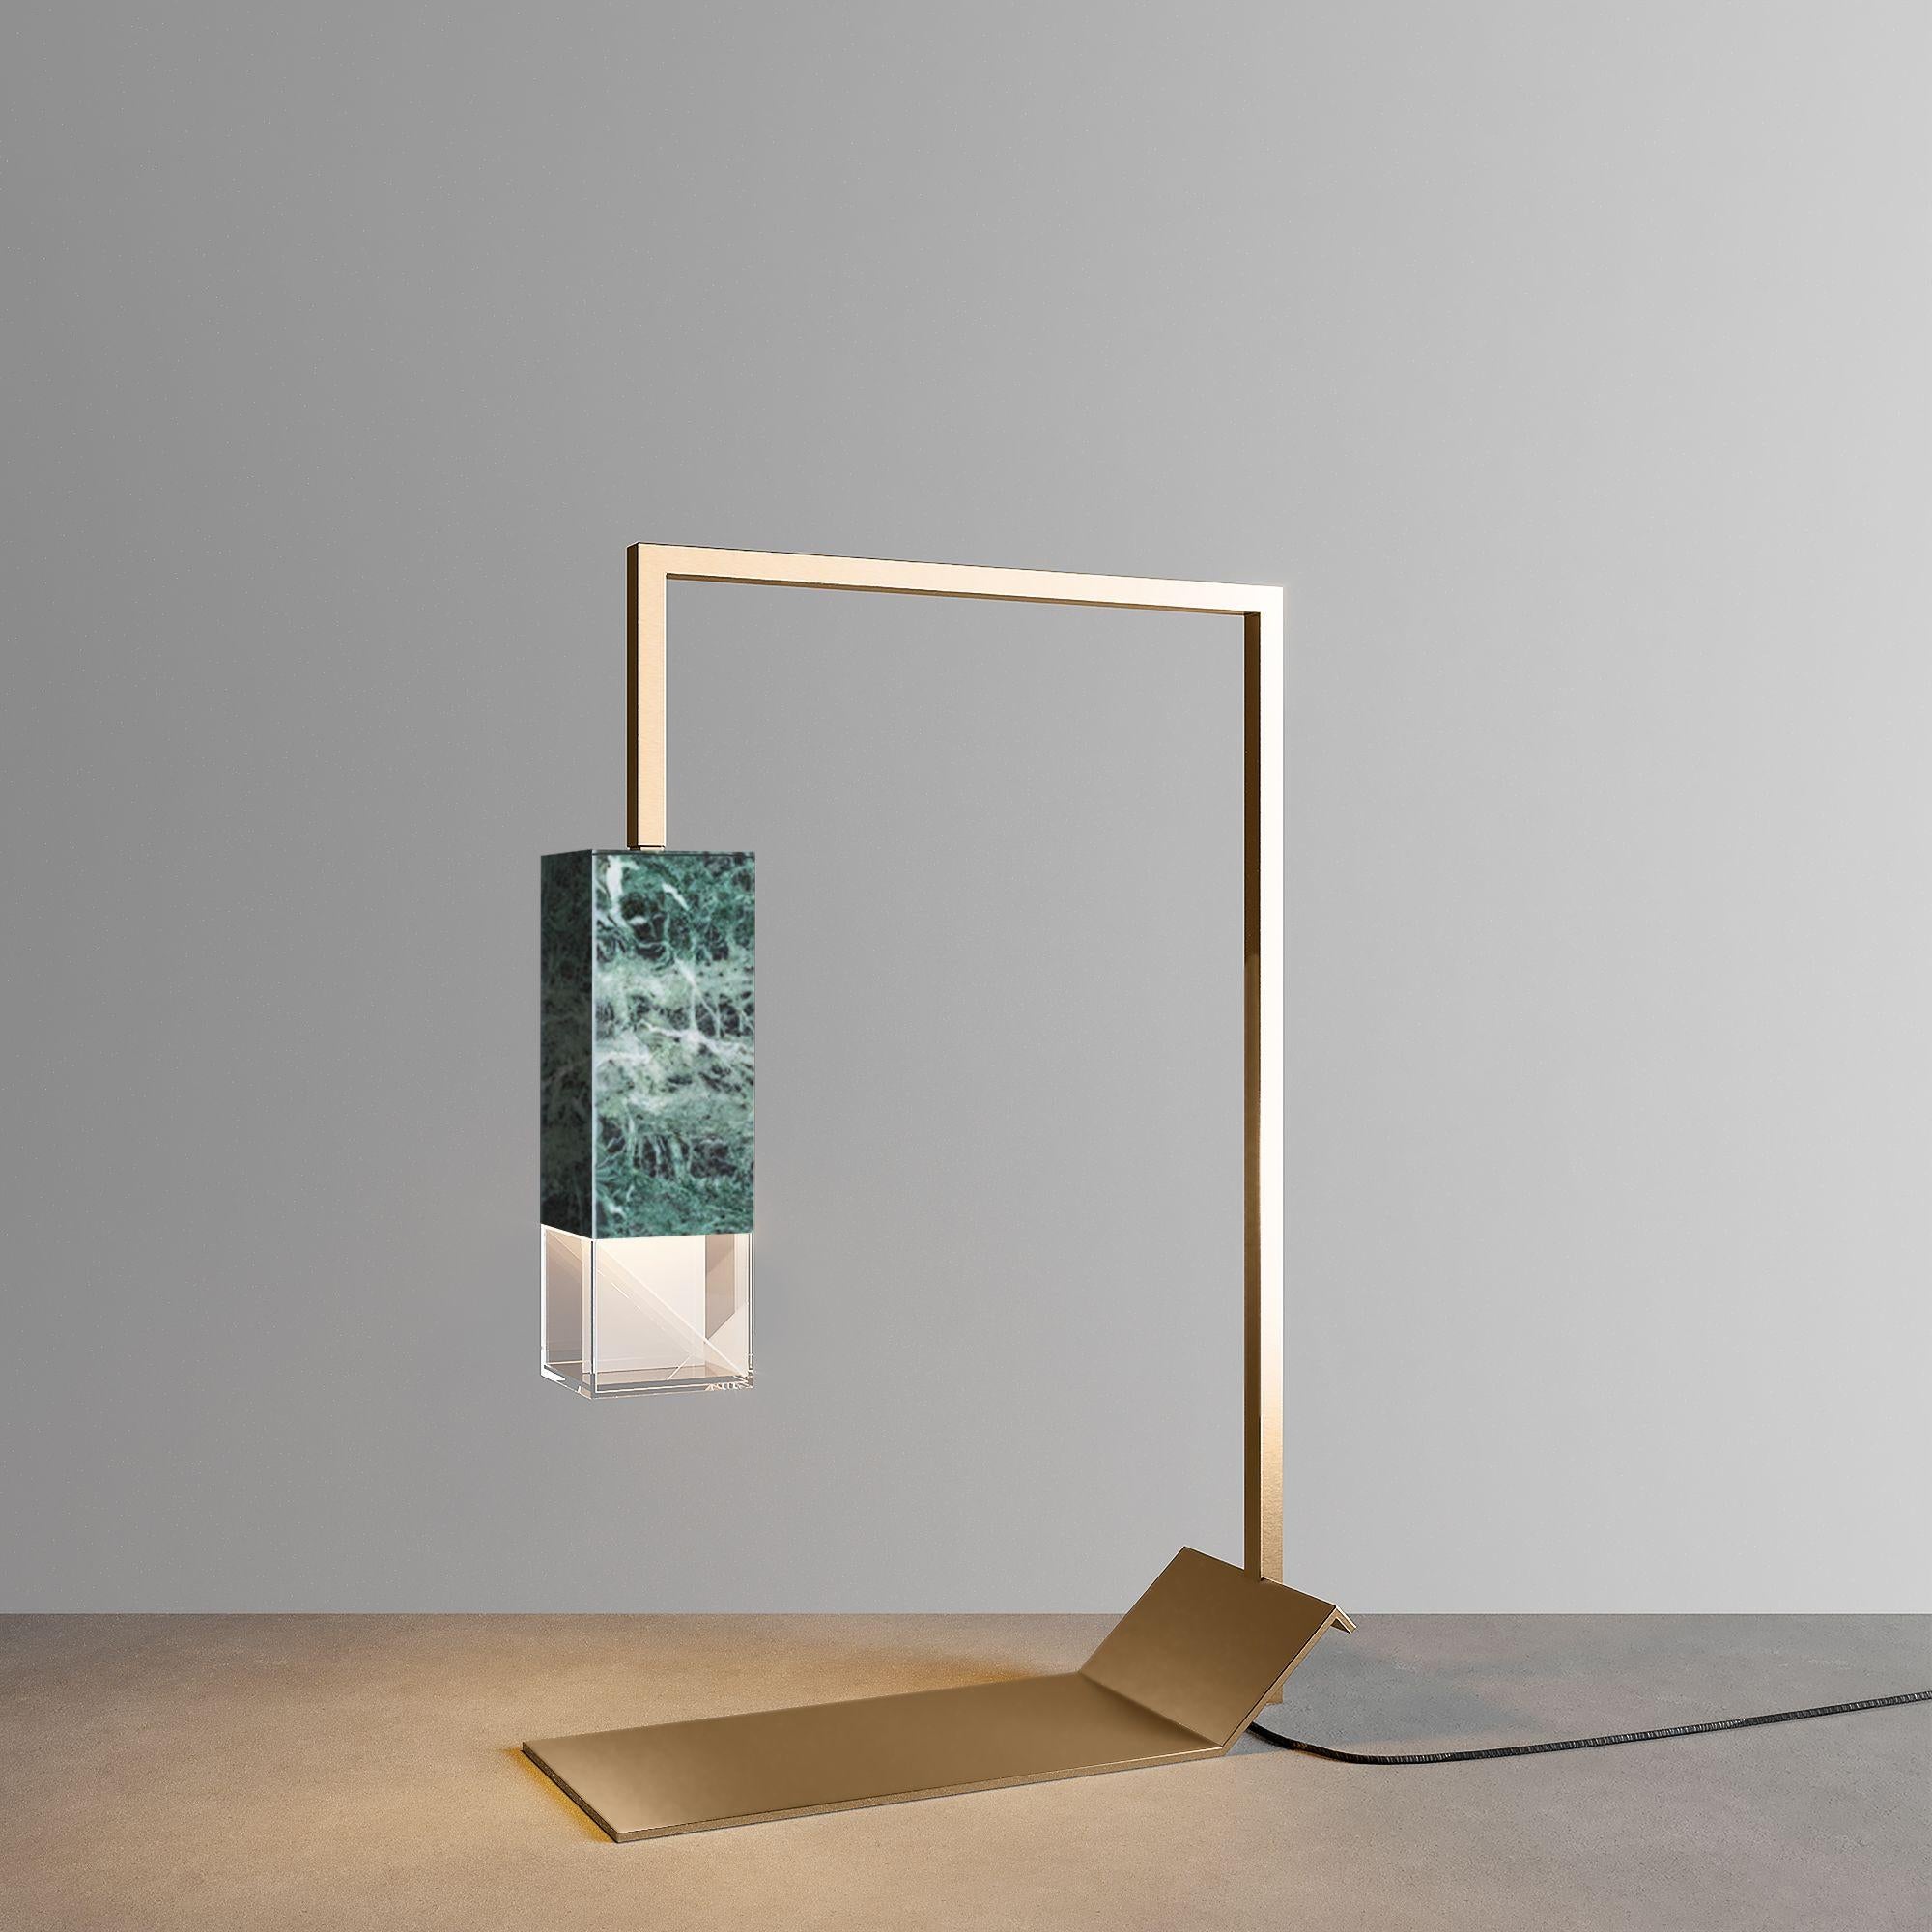 Marble table lamp color edition by Formaminima
Dimensions: W 10 x D 25 x H 40 cm
Materials: Solid marble green alpes, brass

All our lamps can be wired according to each country. If sold to the USA it will be wired for the USA for